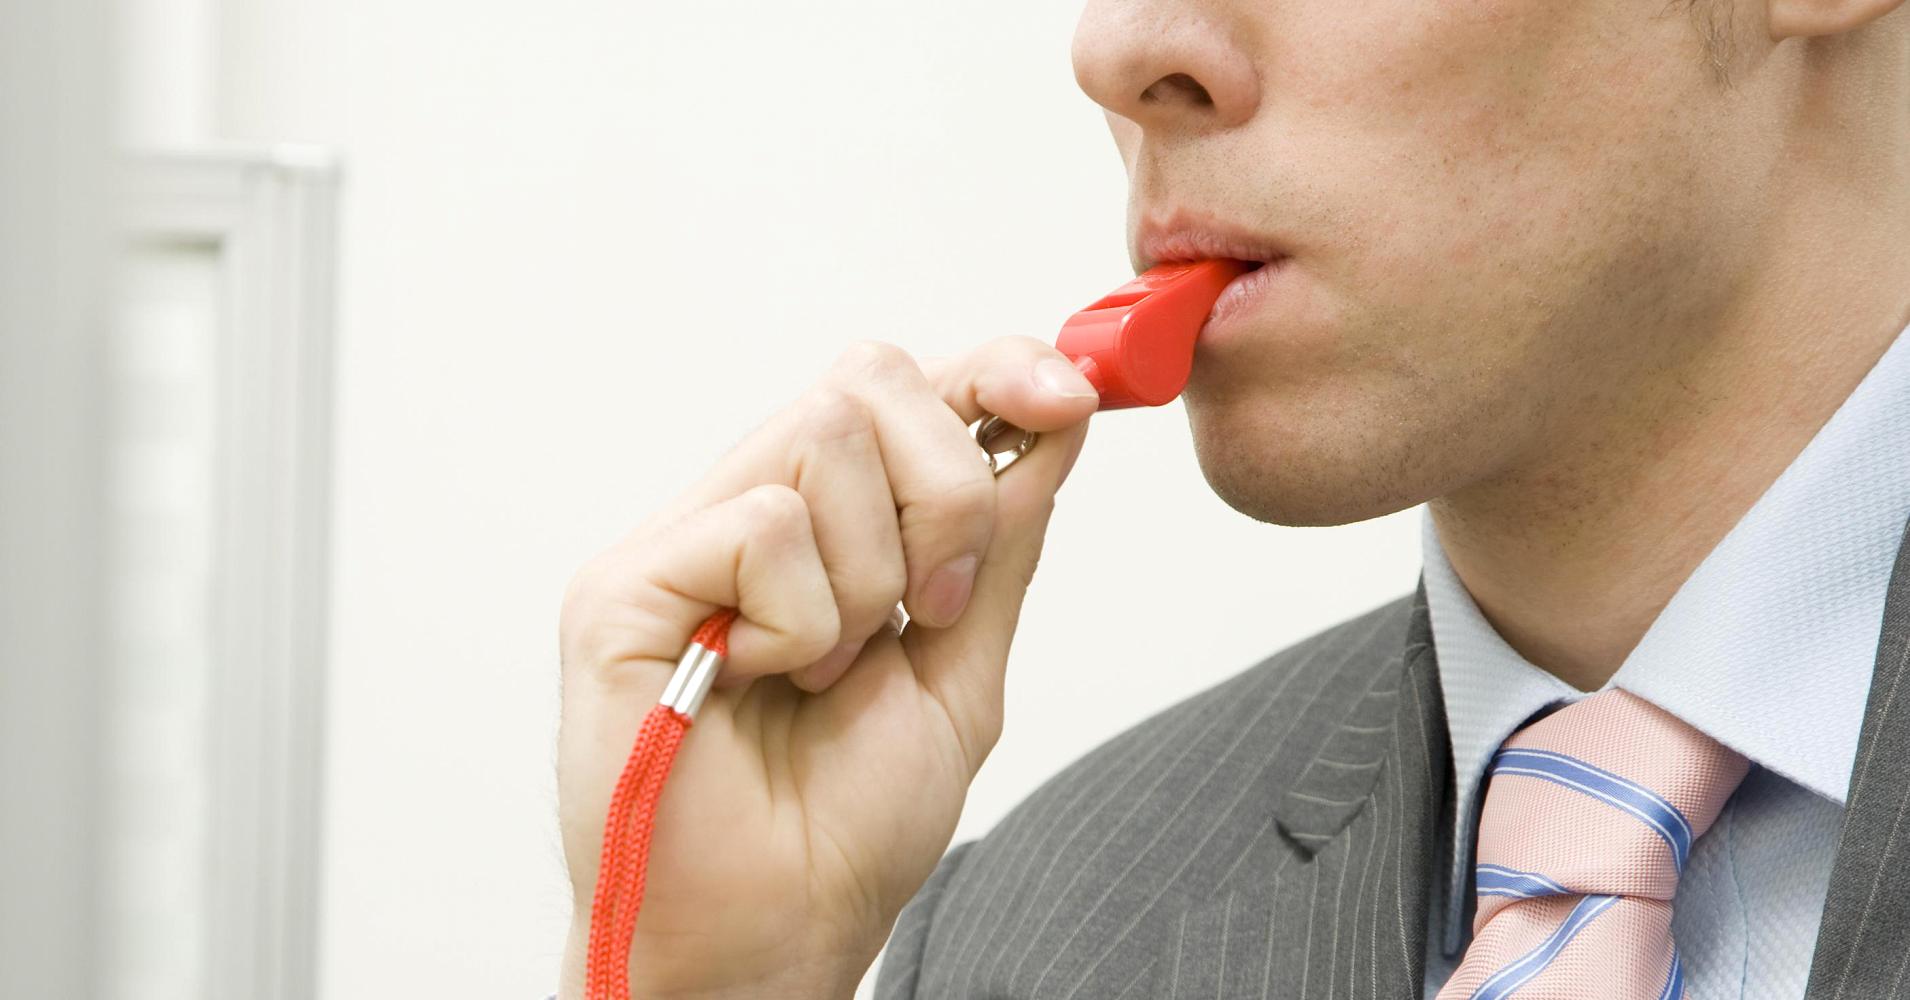 A new study shows why companies whose employees blow the whistle on wrongdoing perform better